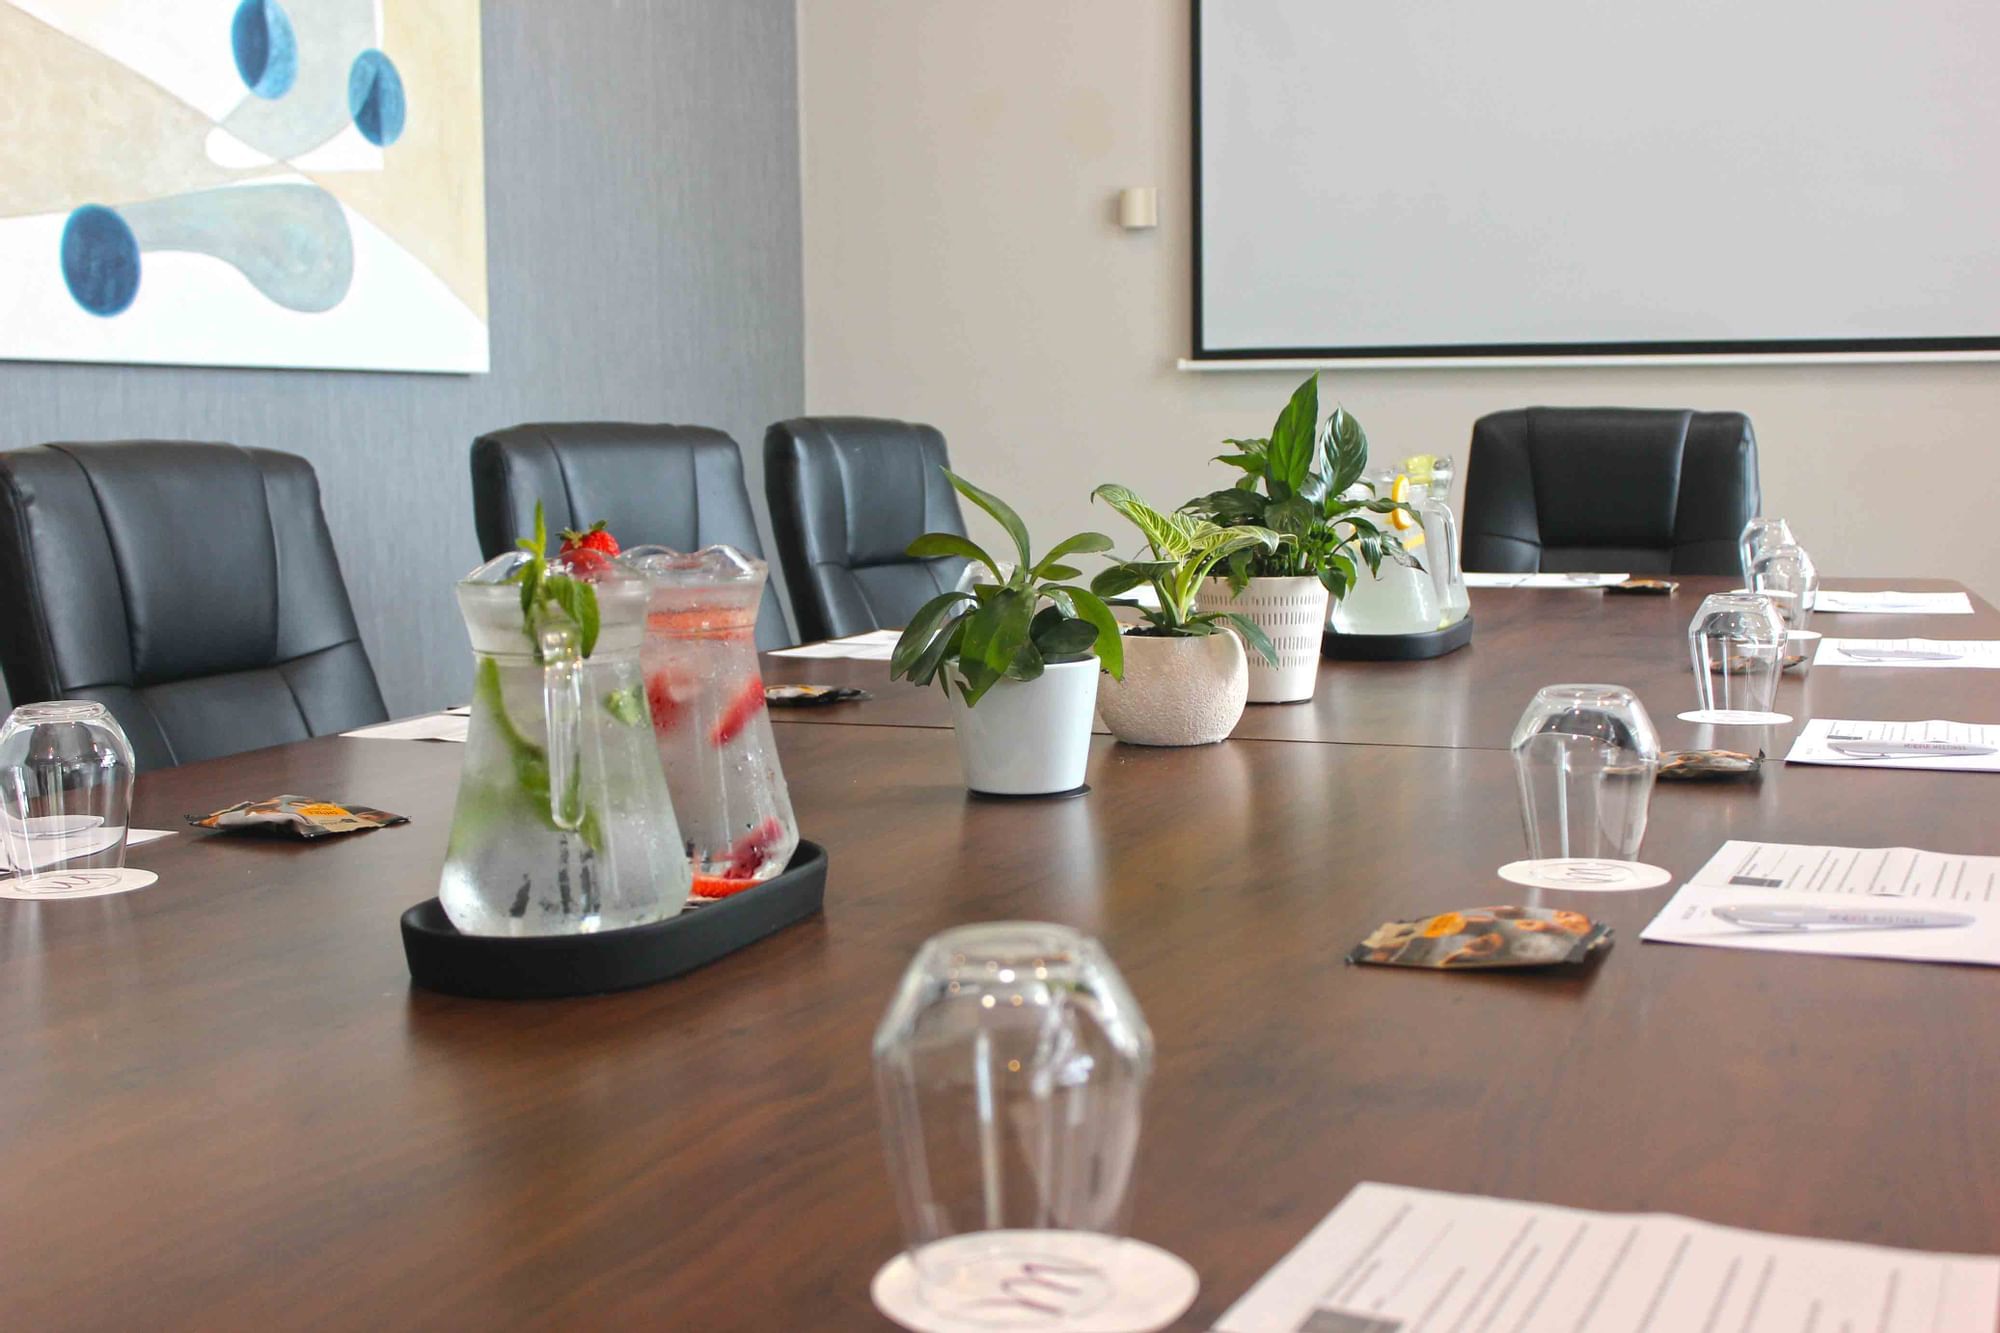 Boardroom table featuring plants